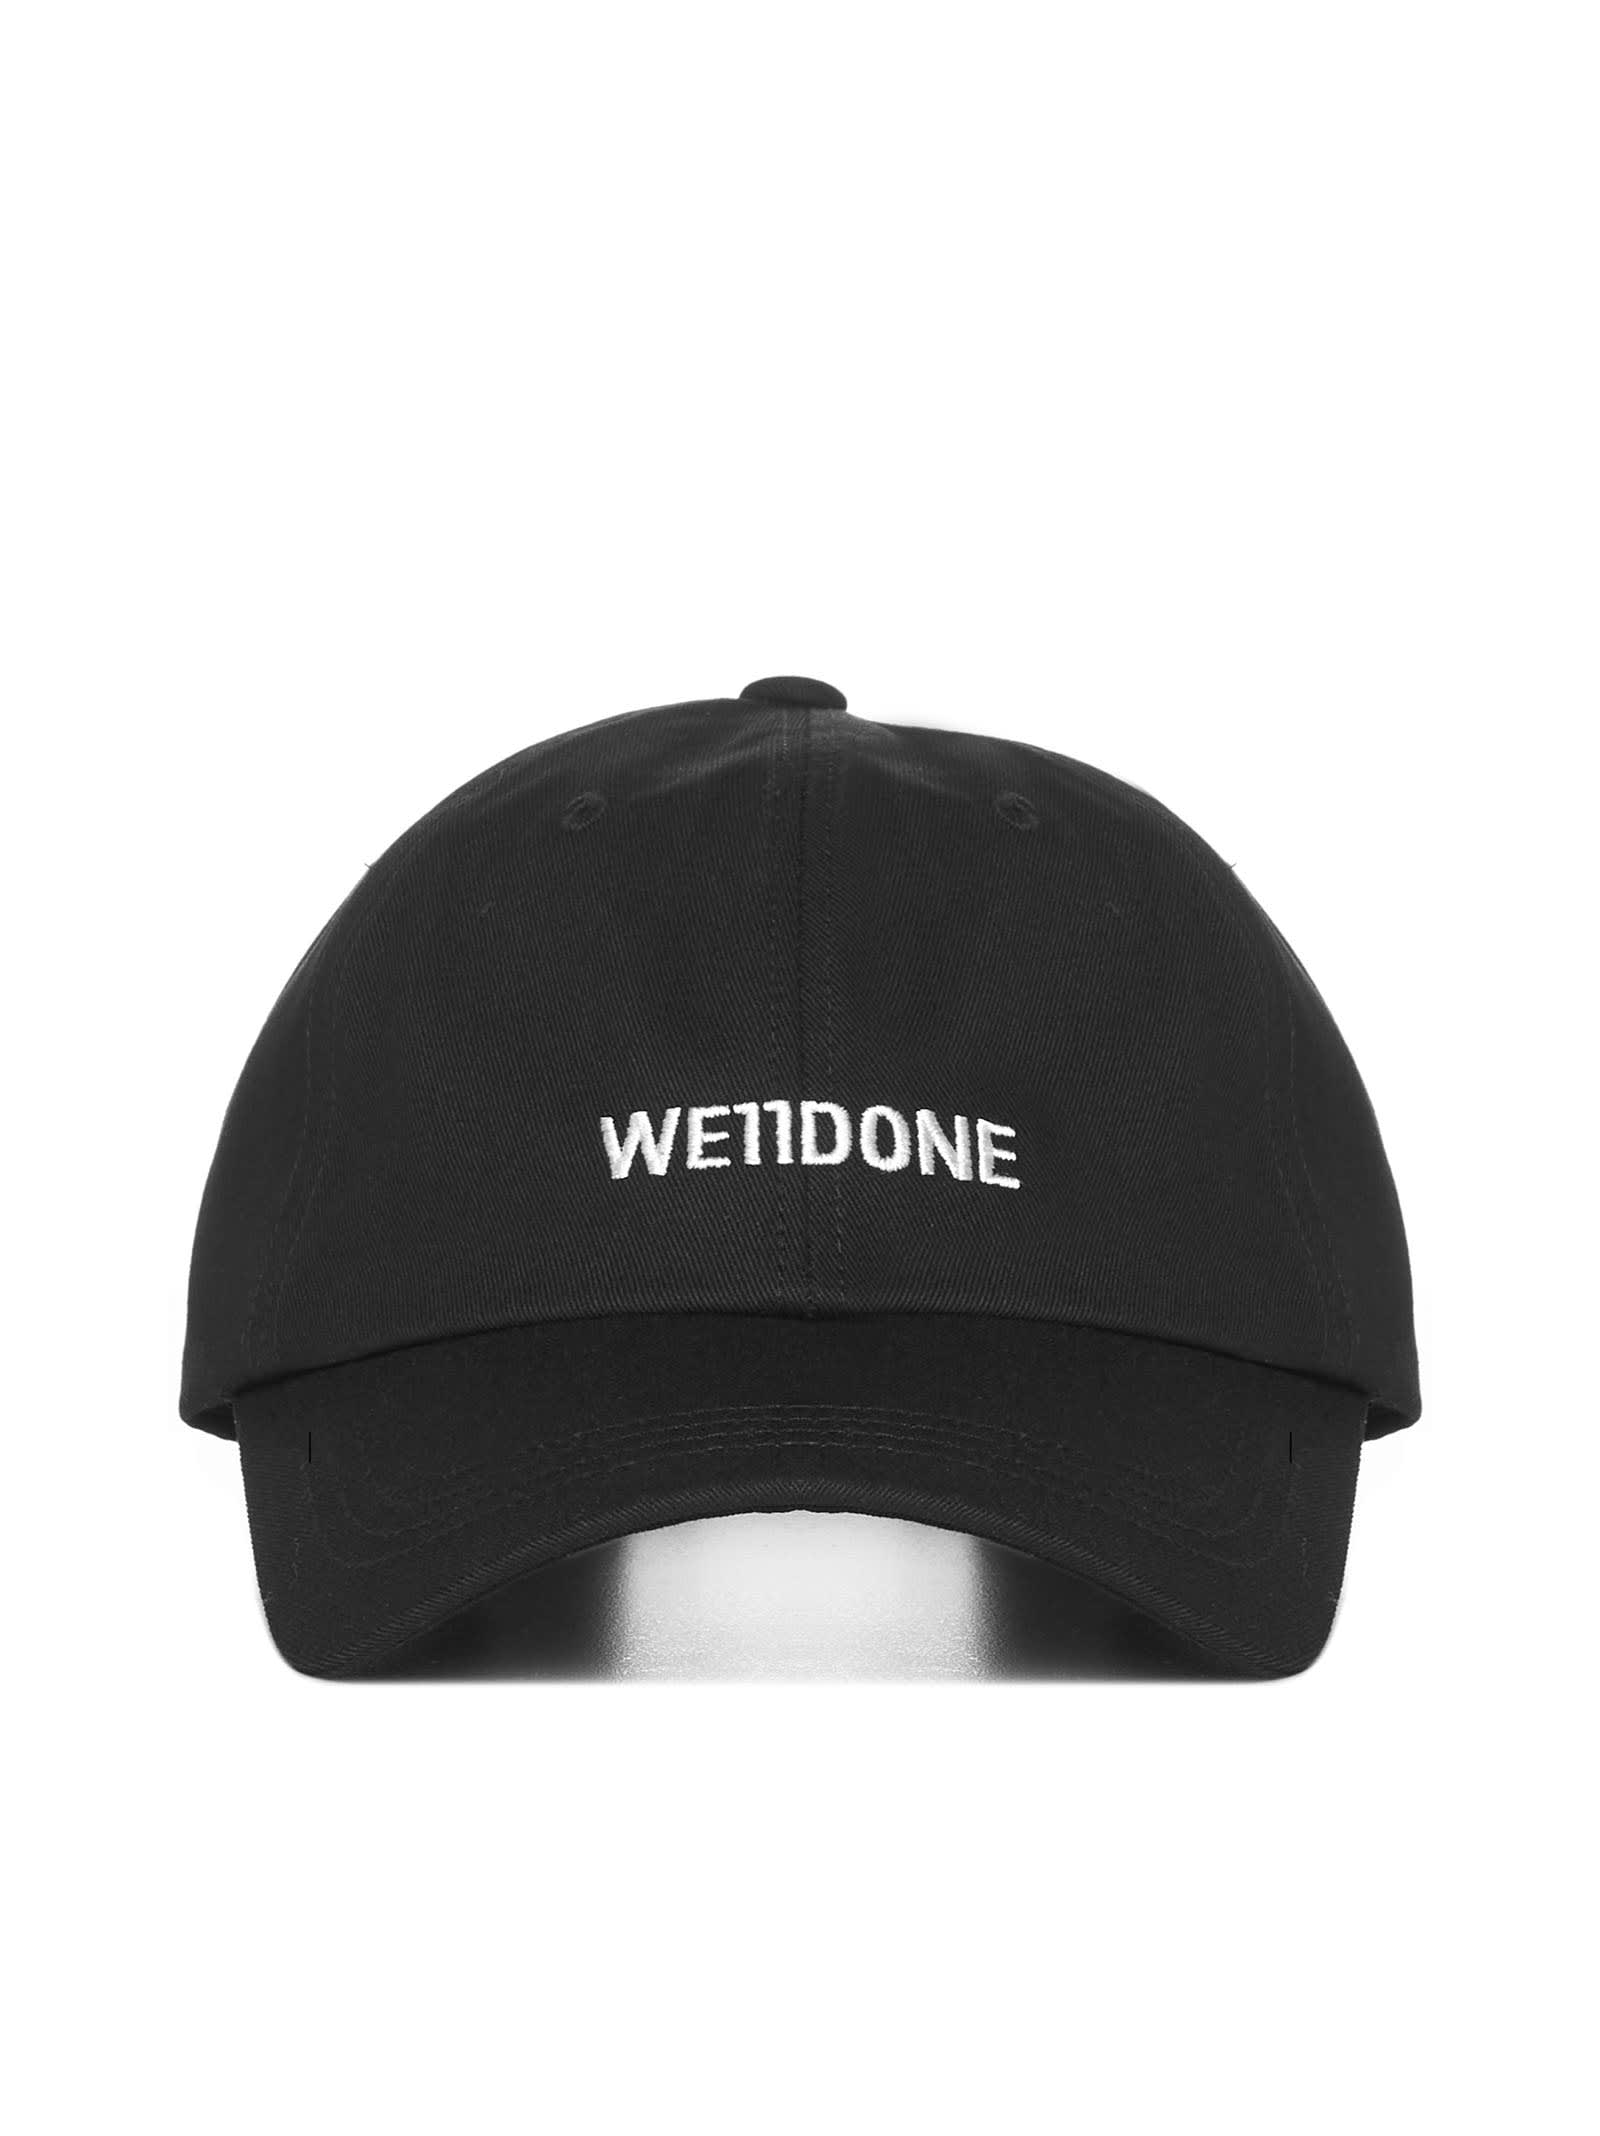 WE11 DONE HAT